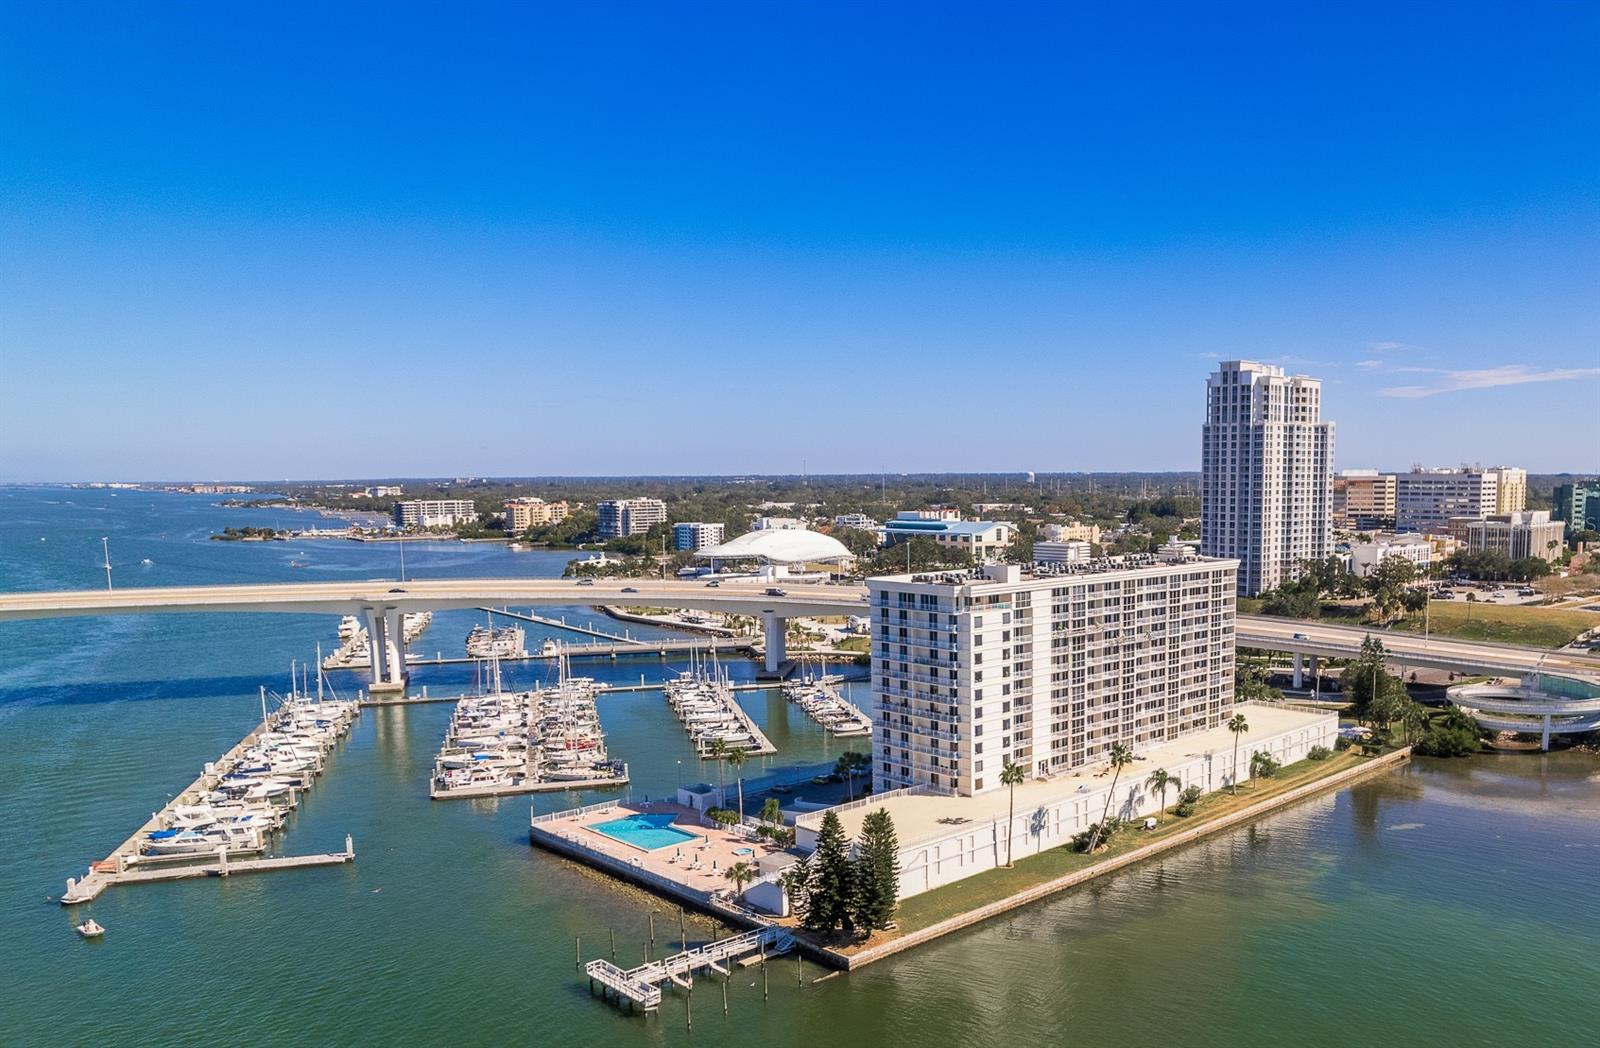 Located in the heart of Clearwater